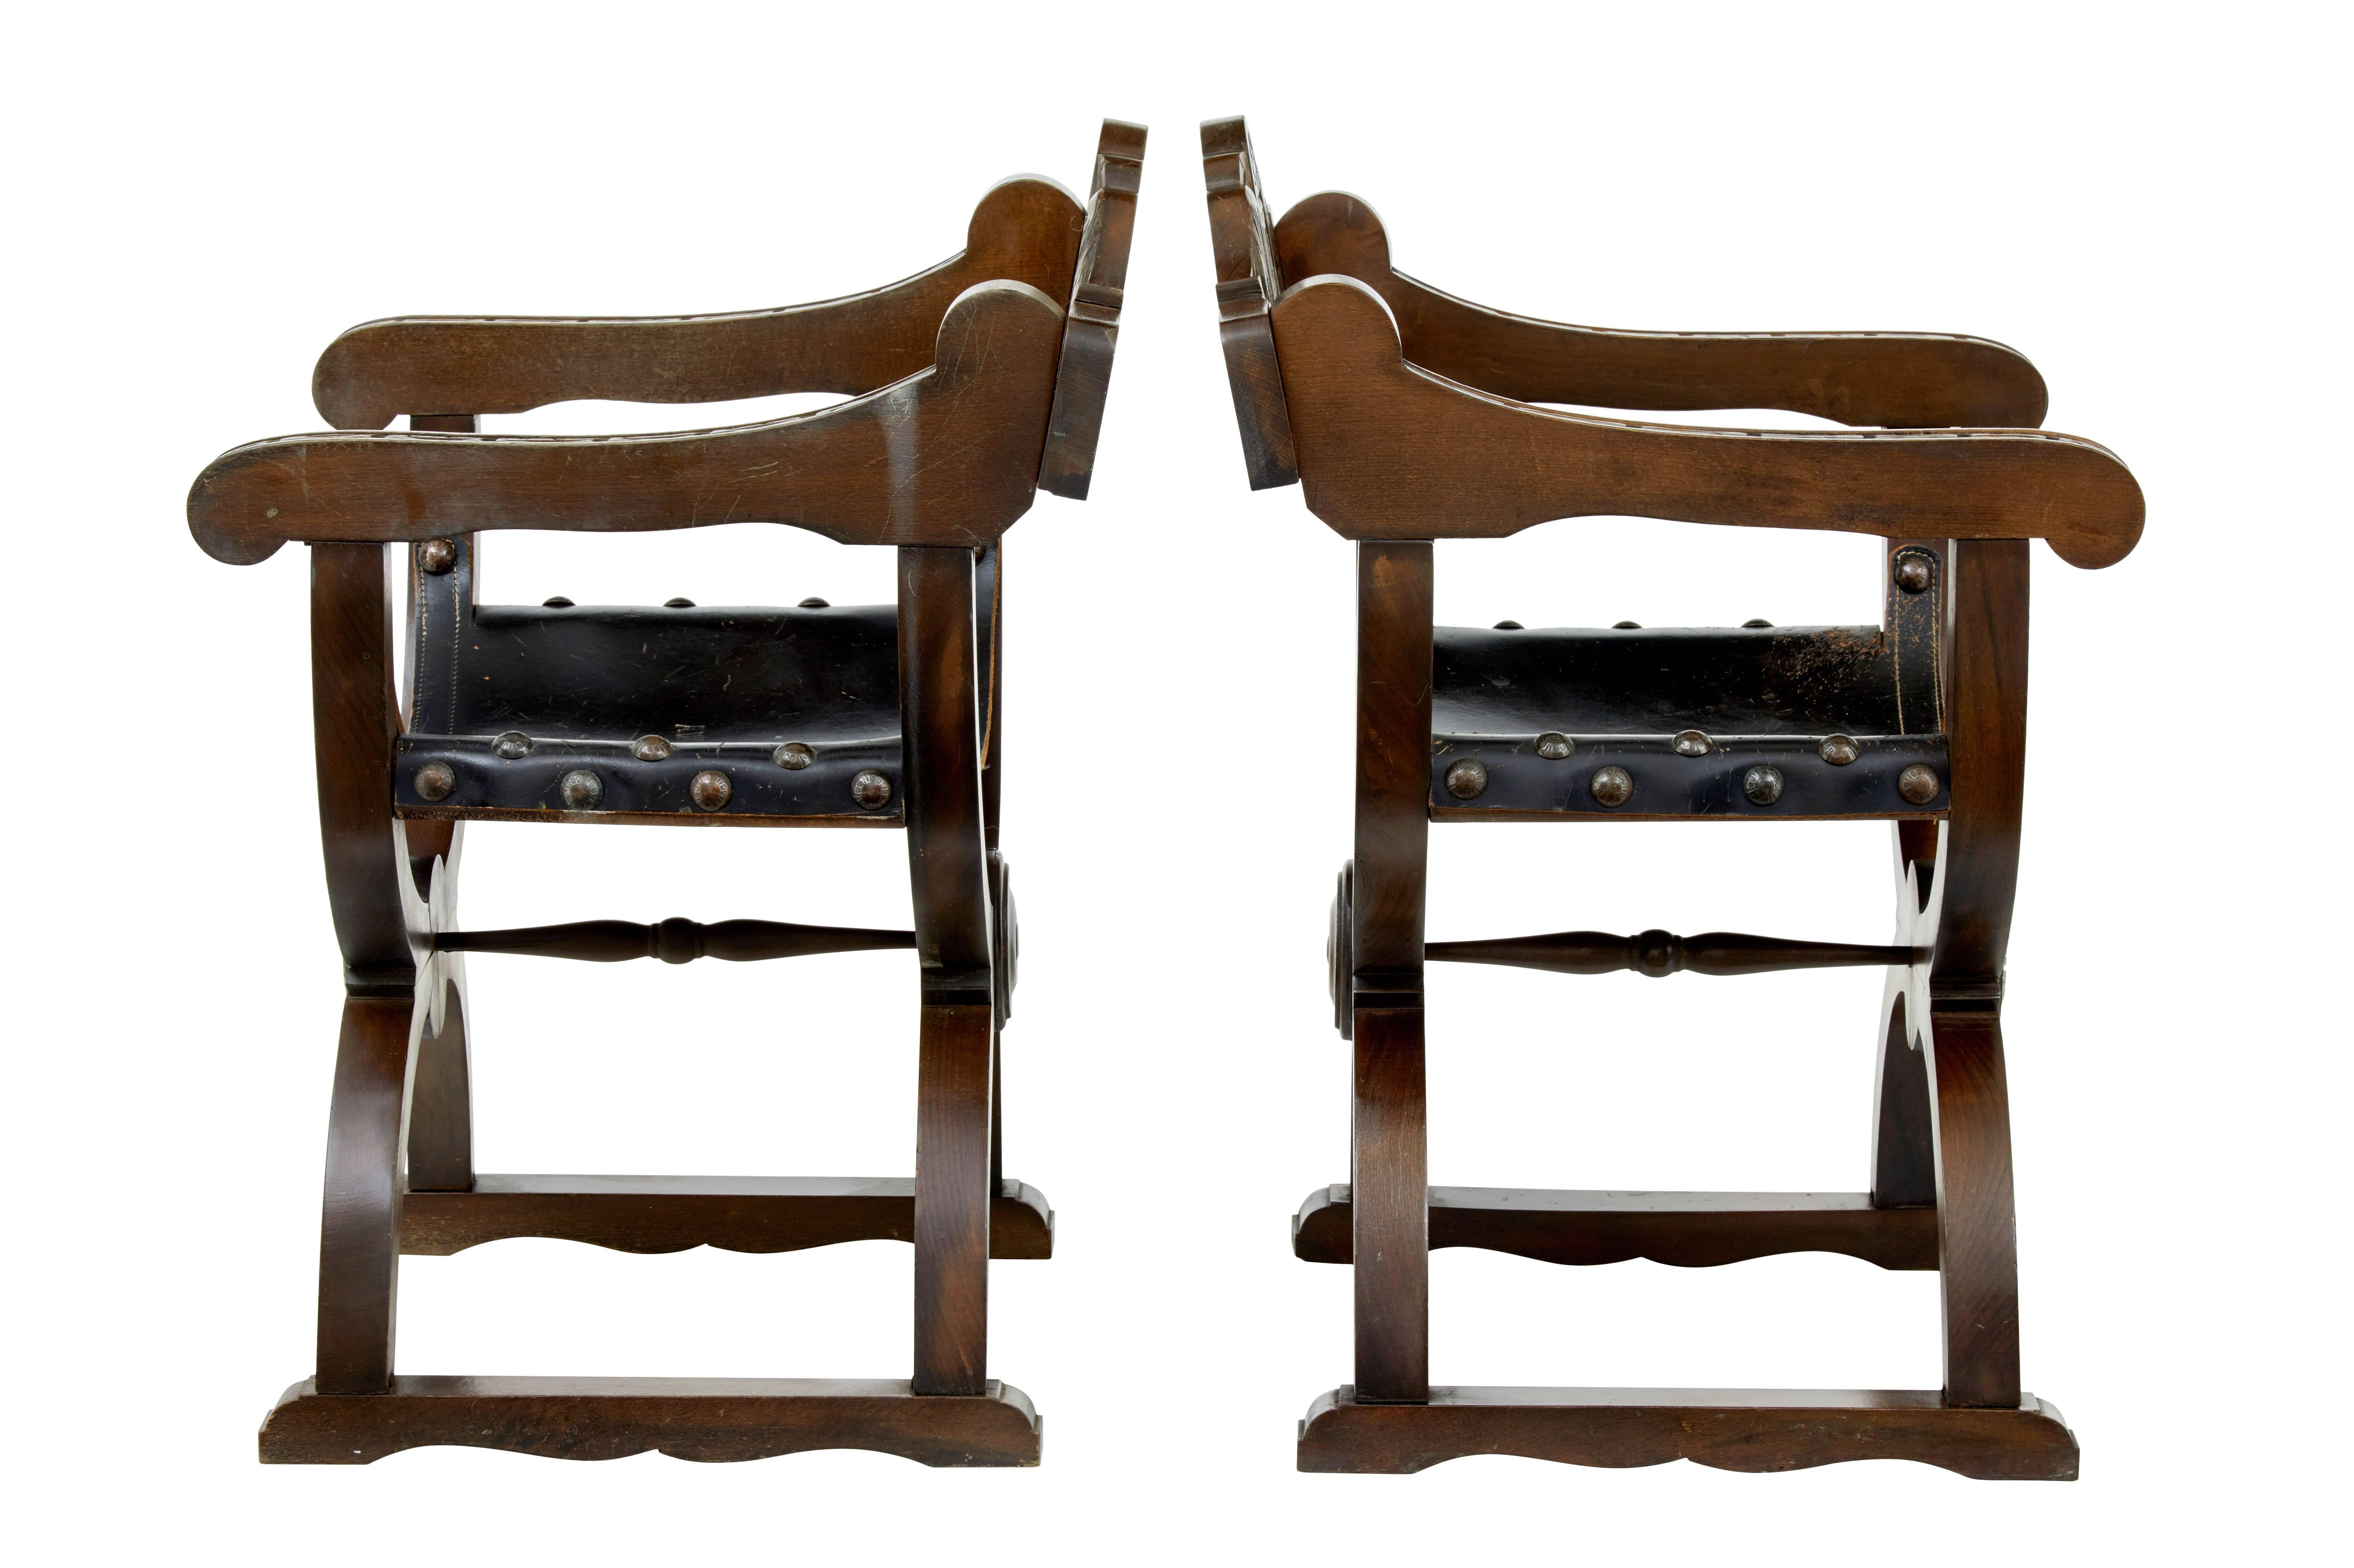 Pair of decorative carved oak Dante / Savonarola X-frame chairs circa 1900.
Carved back with stylized coat of arms.
X-frame legs, standing on sledge feet.
Leather seat in good order.

Measures: Height 31